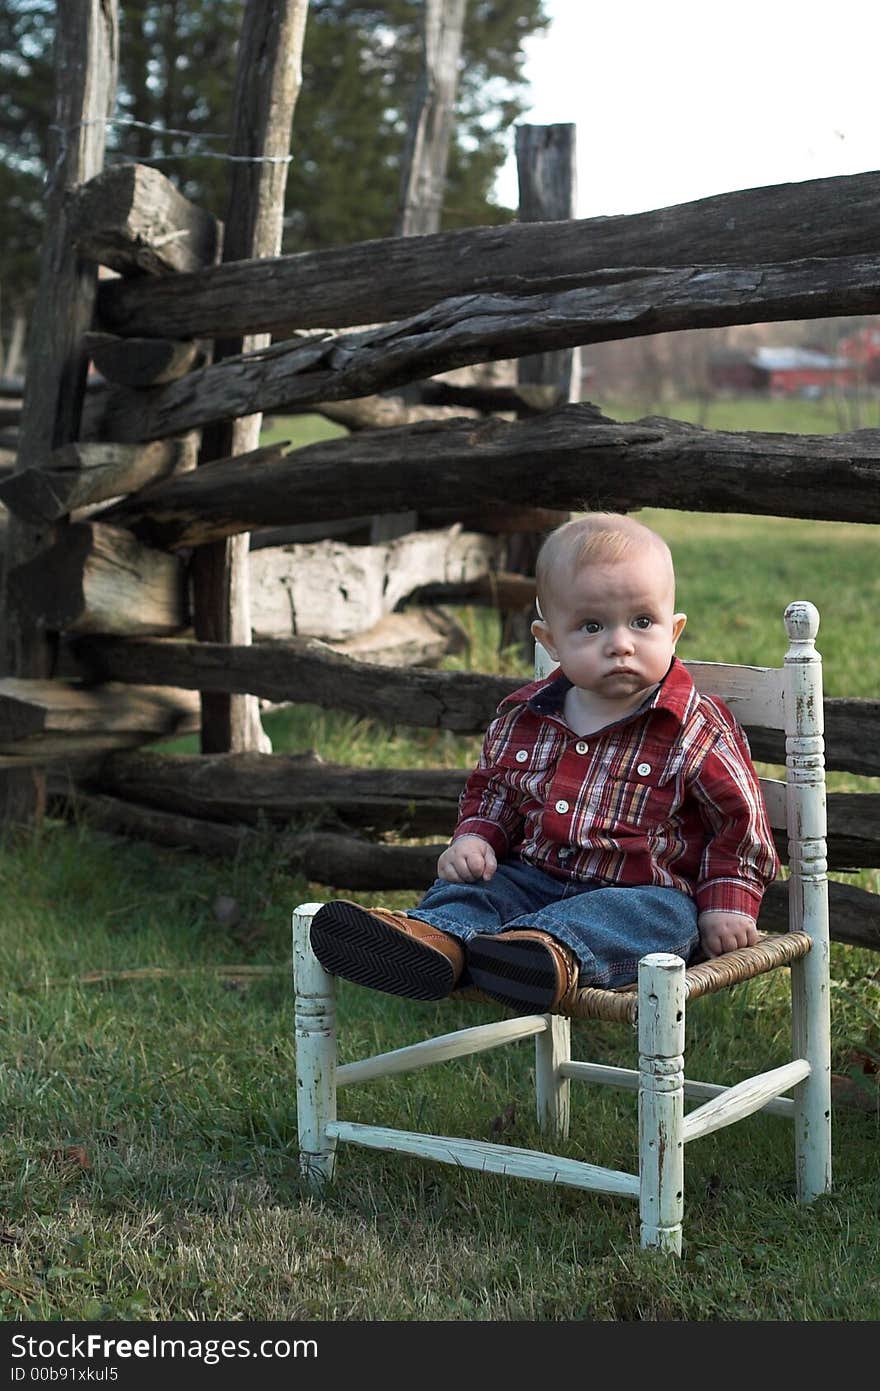 Image of baby boy sitting on a chair in front of a fence. Image of baby boy sitting on a chair in front of a fence